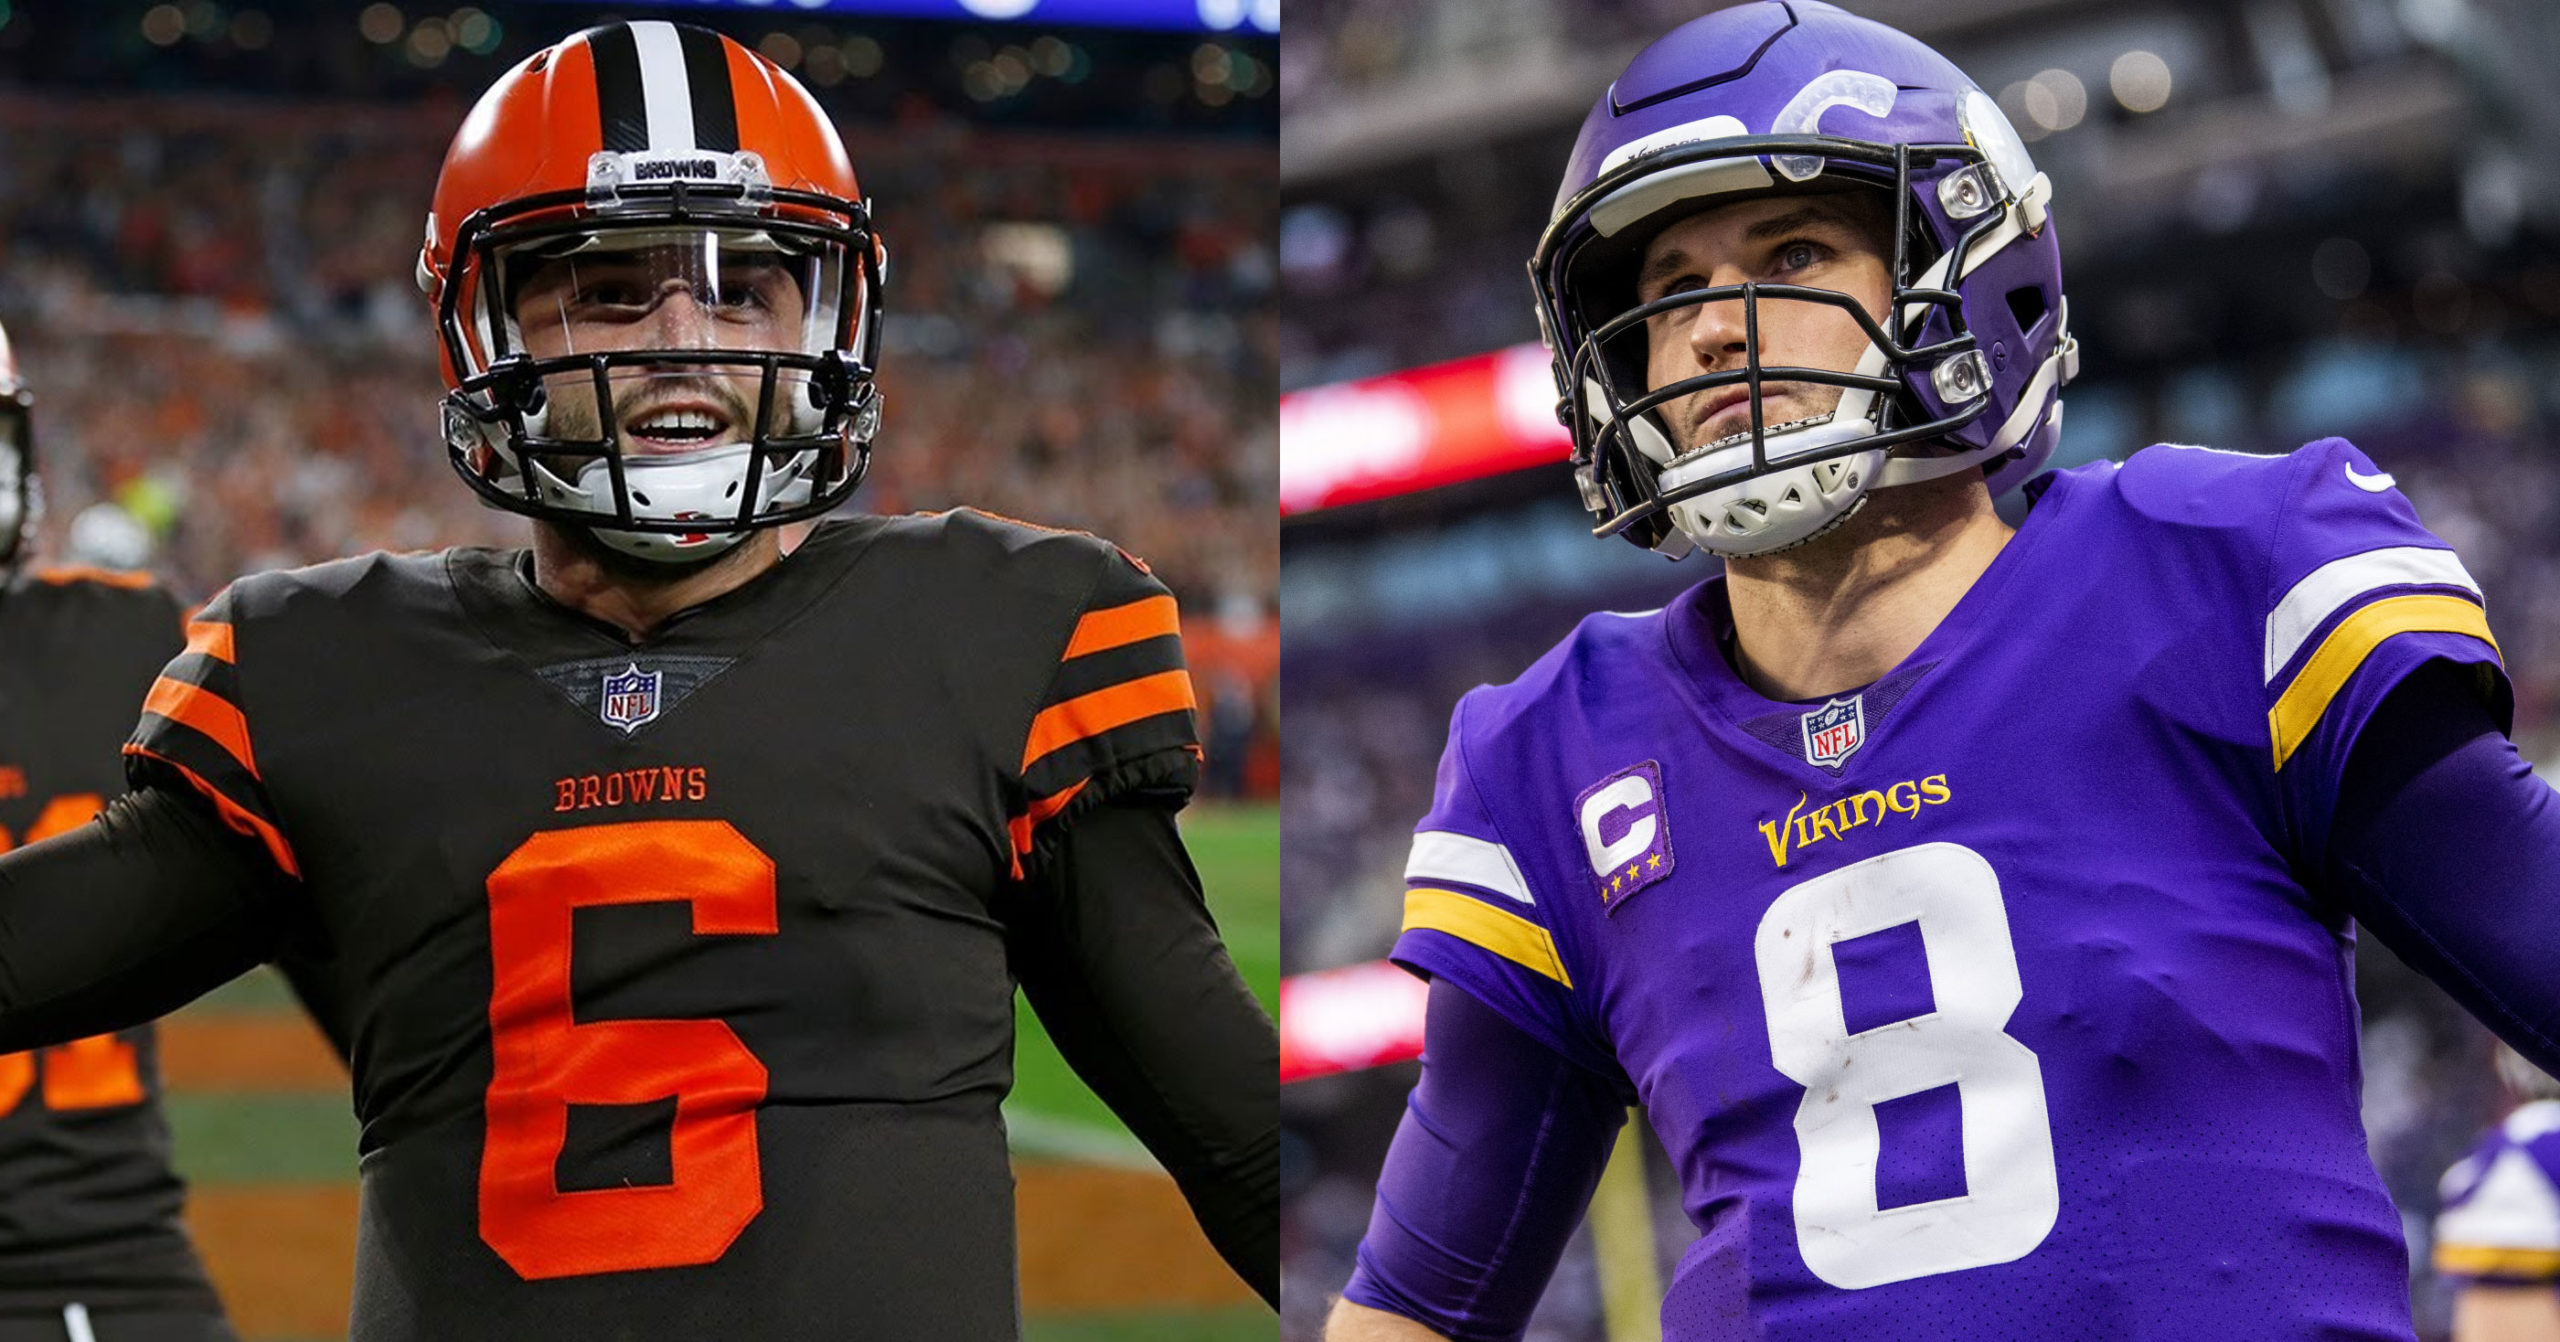 Rumors Swirling Of Cleveland Browns & Minnesota Vikings Swapping